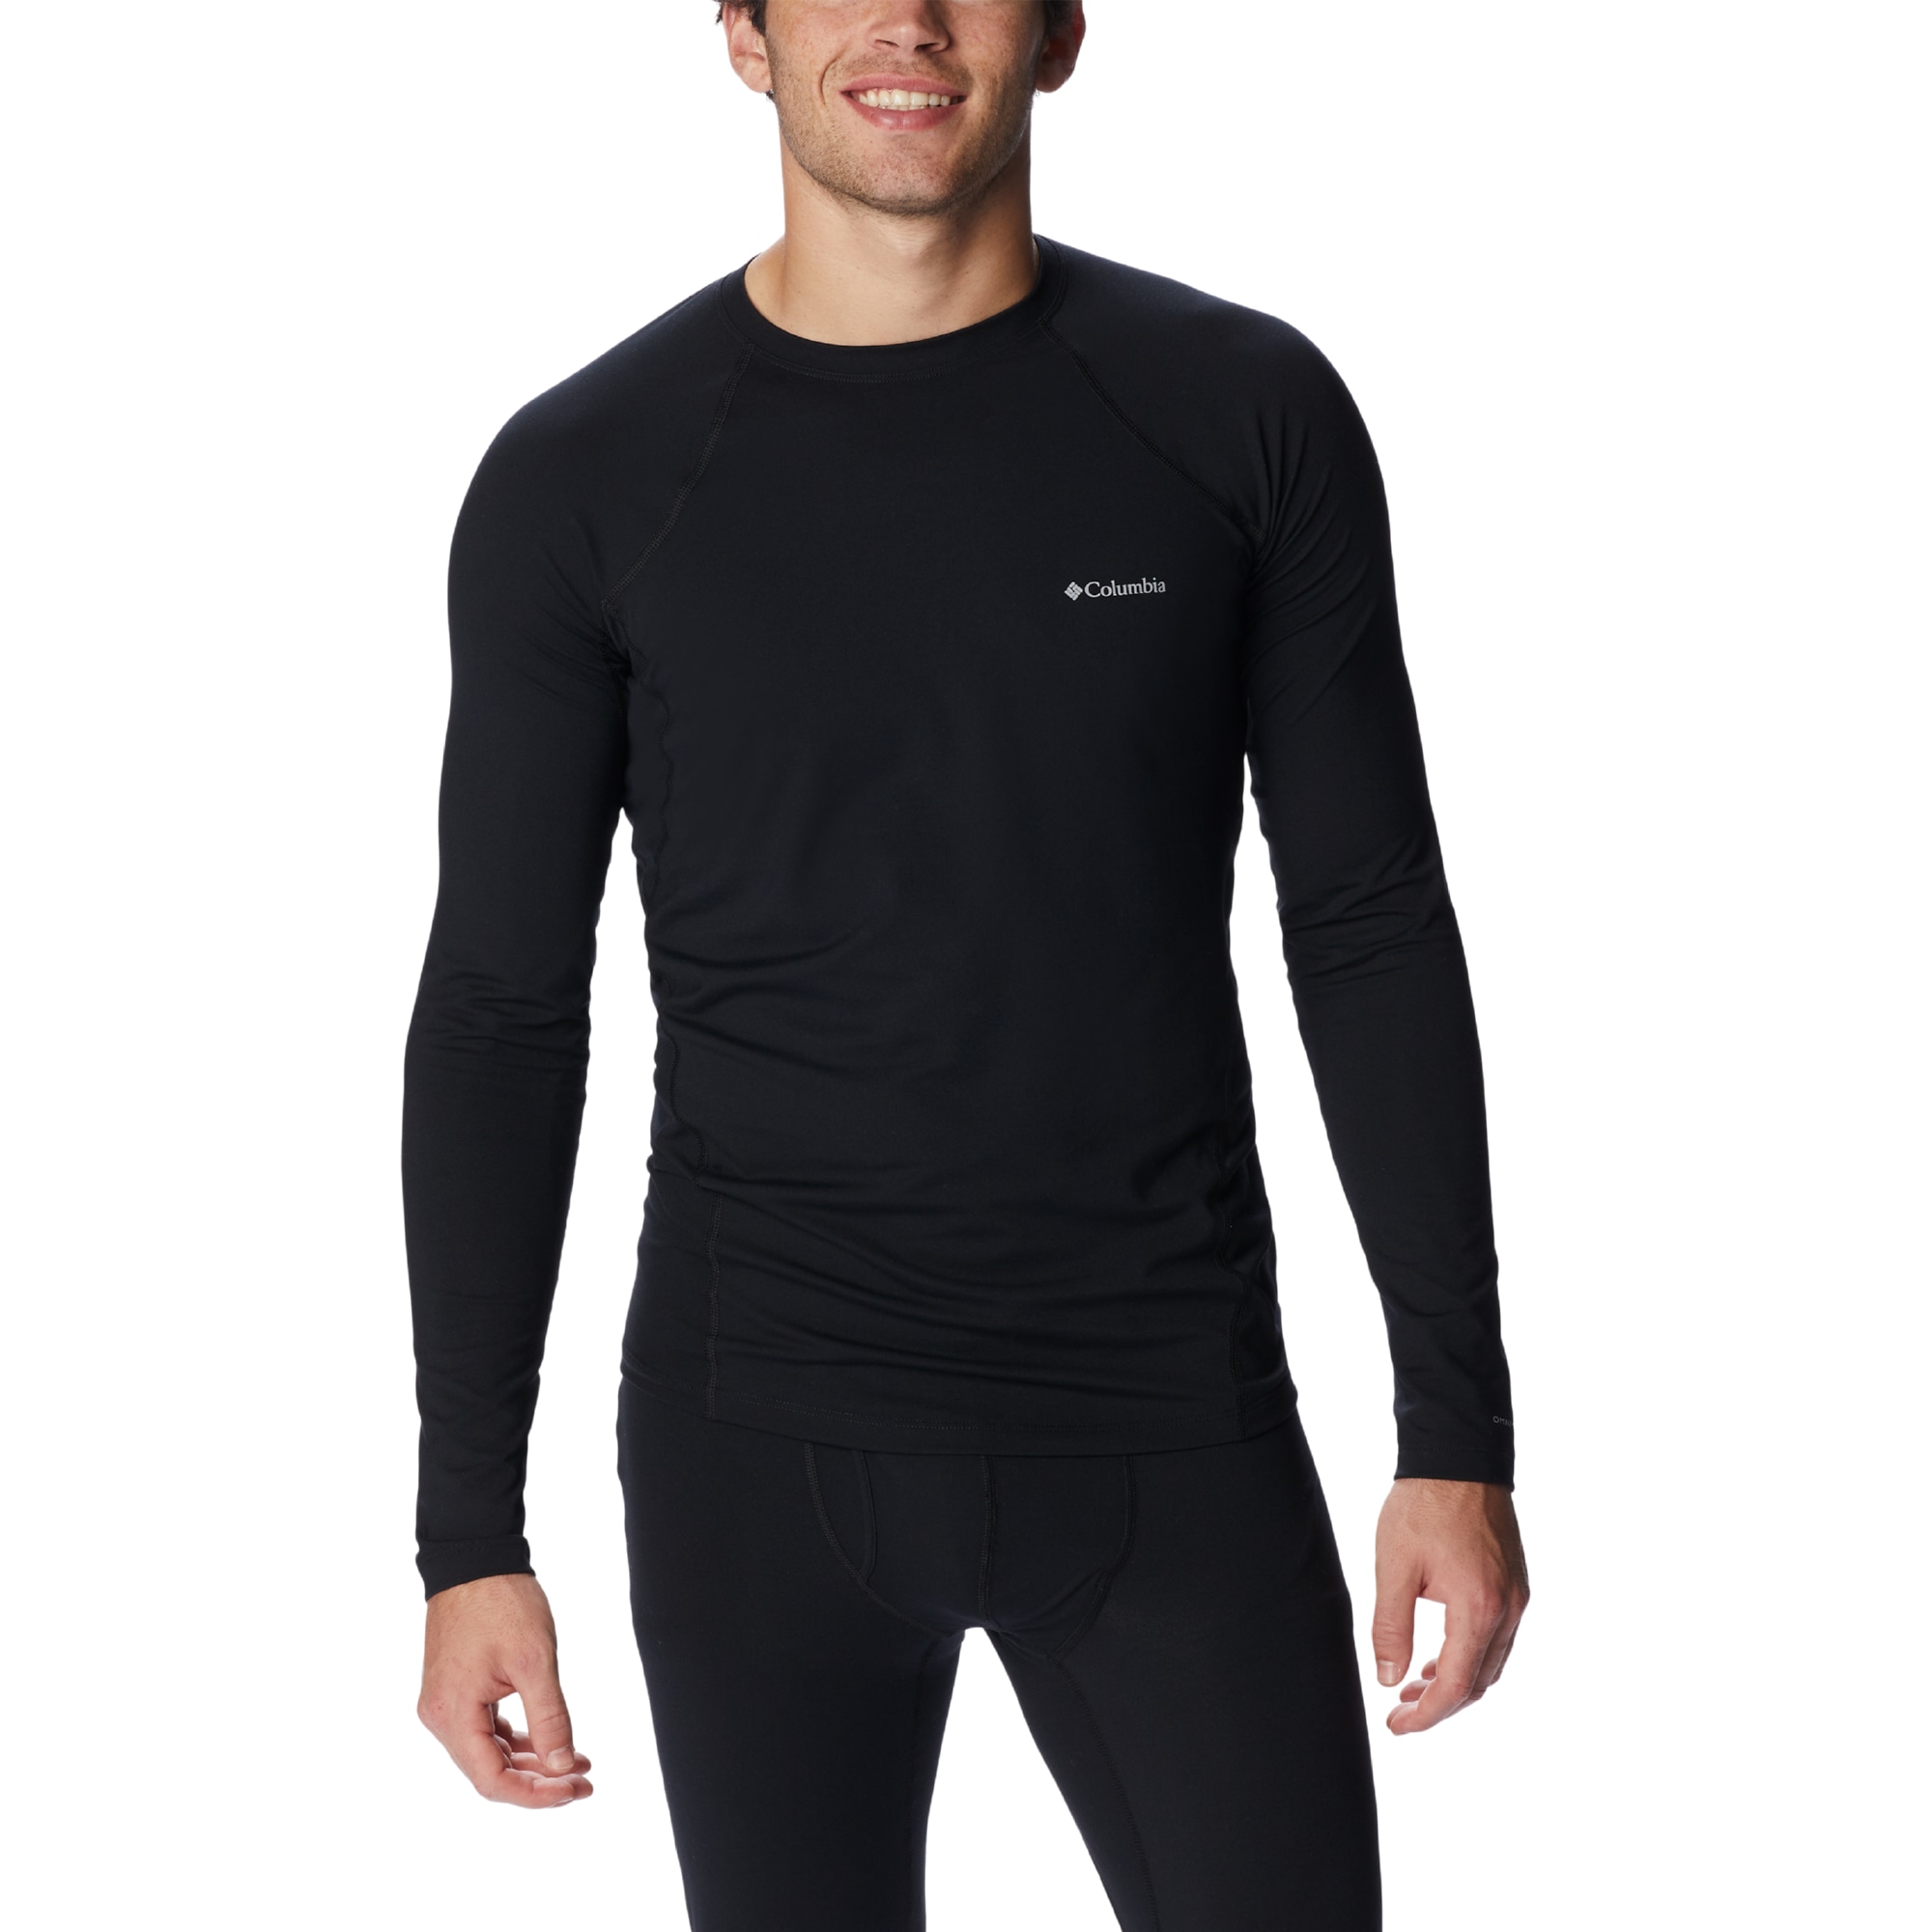 Base Layer Tops - Base Layers - Men | Breathe Outdoors